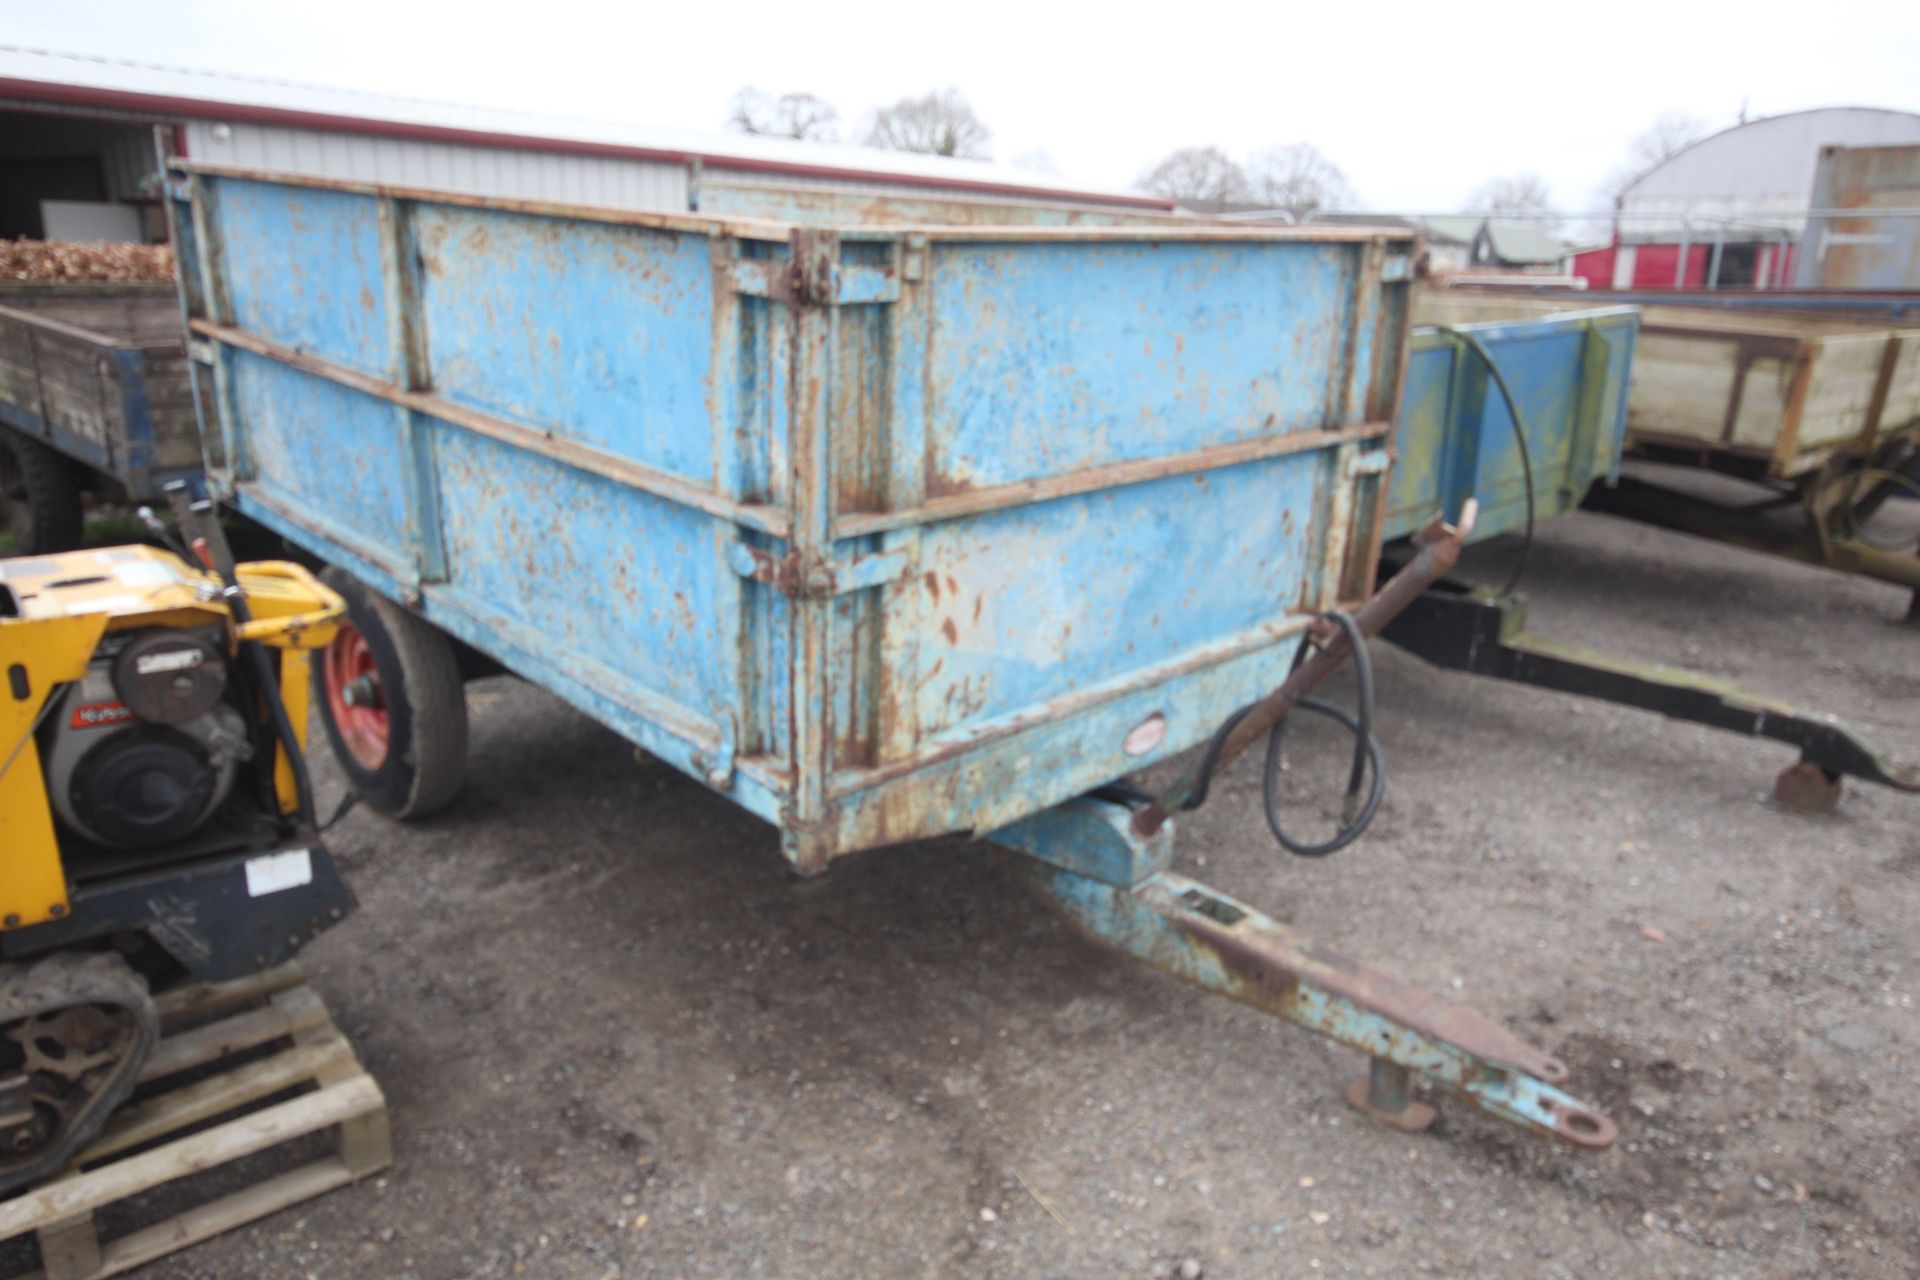 Harford 3T single axle tipping trailer.